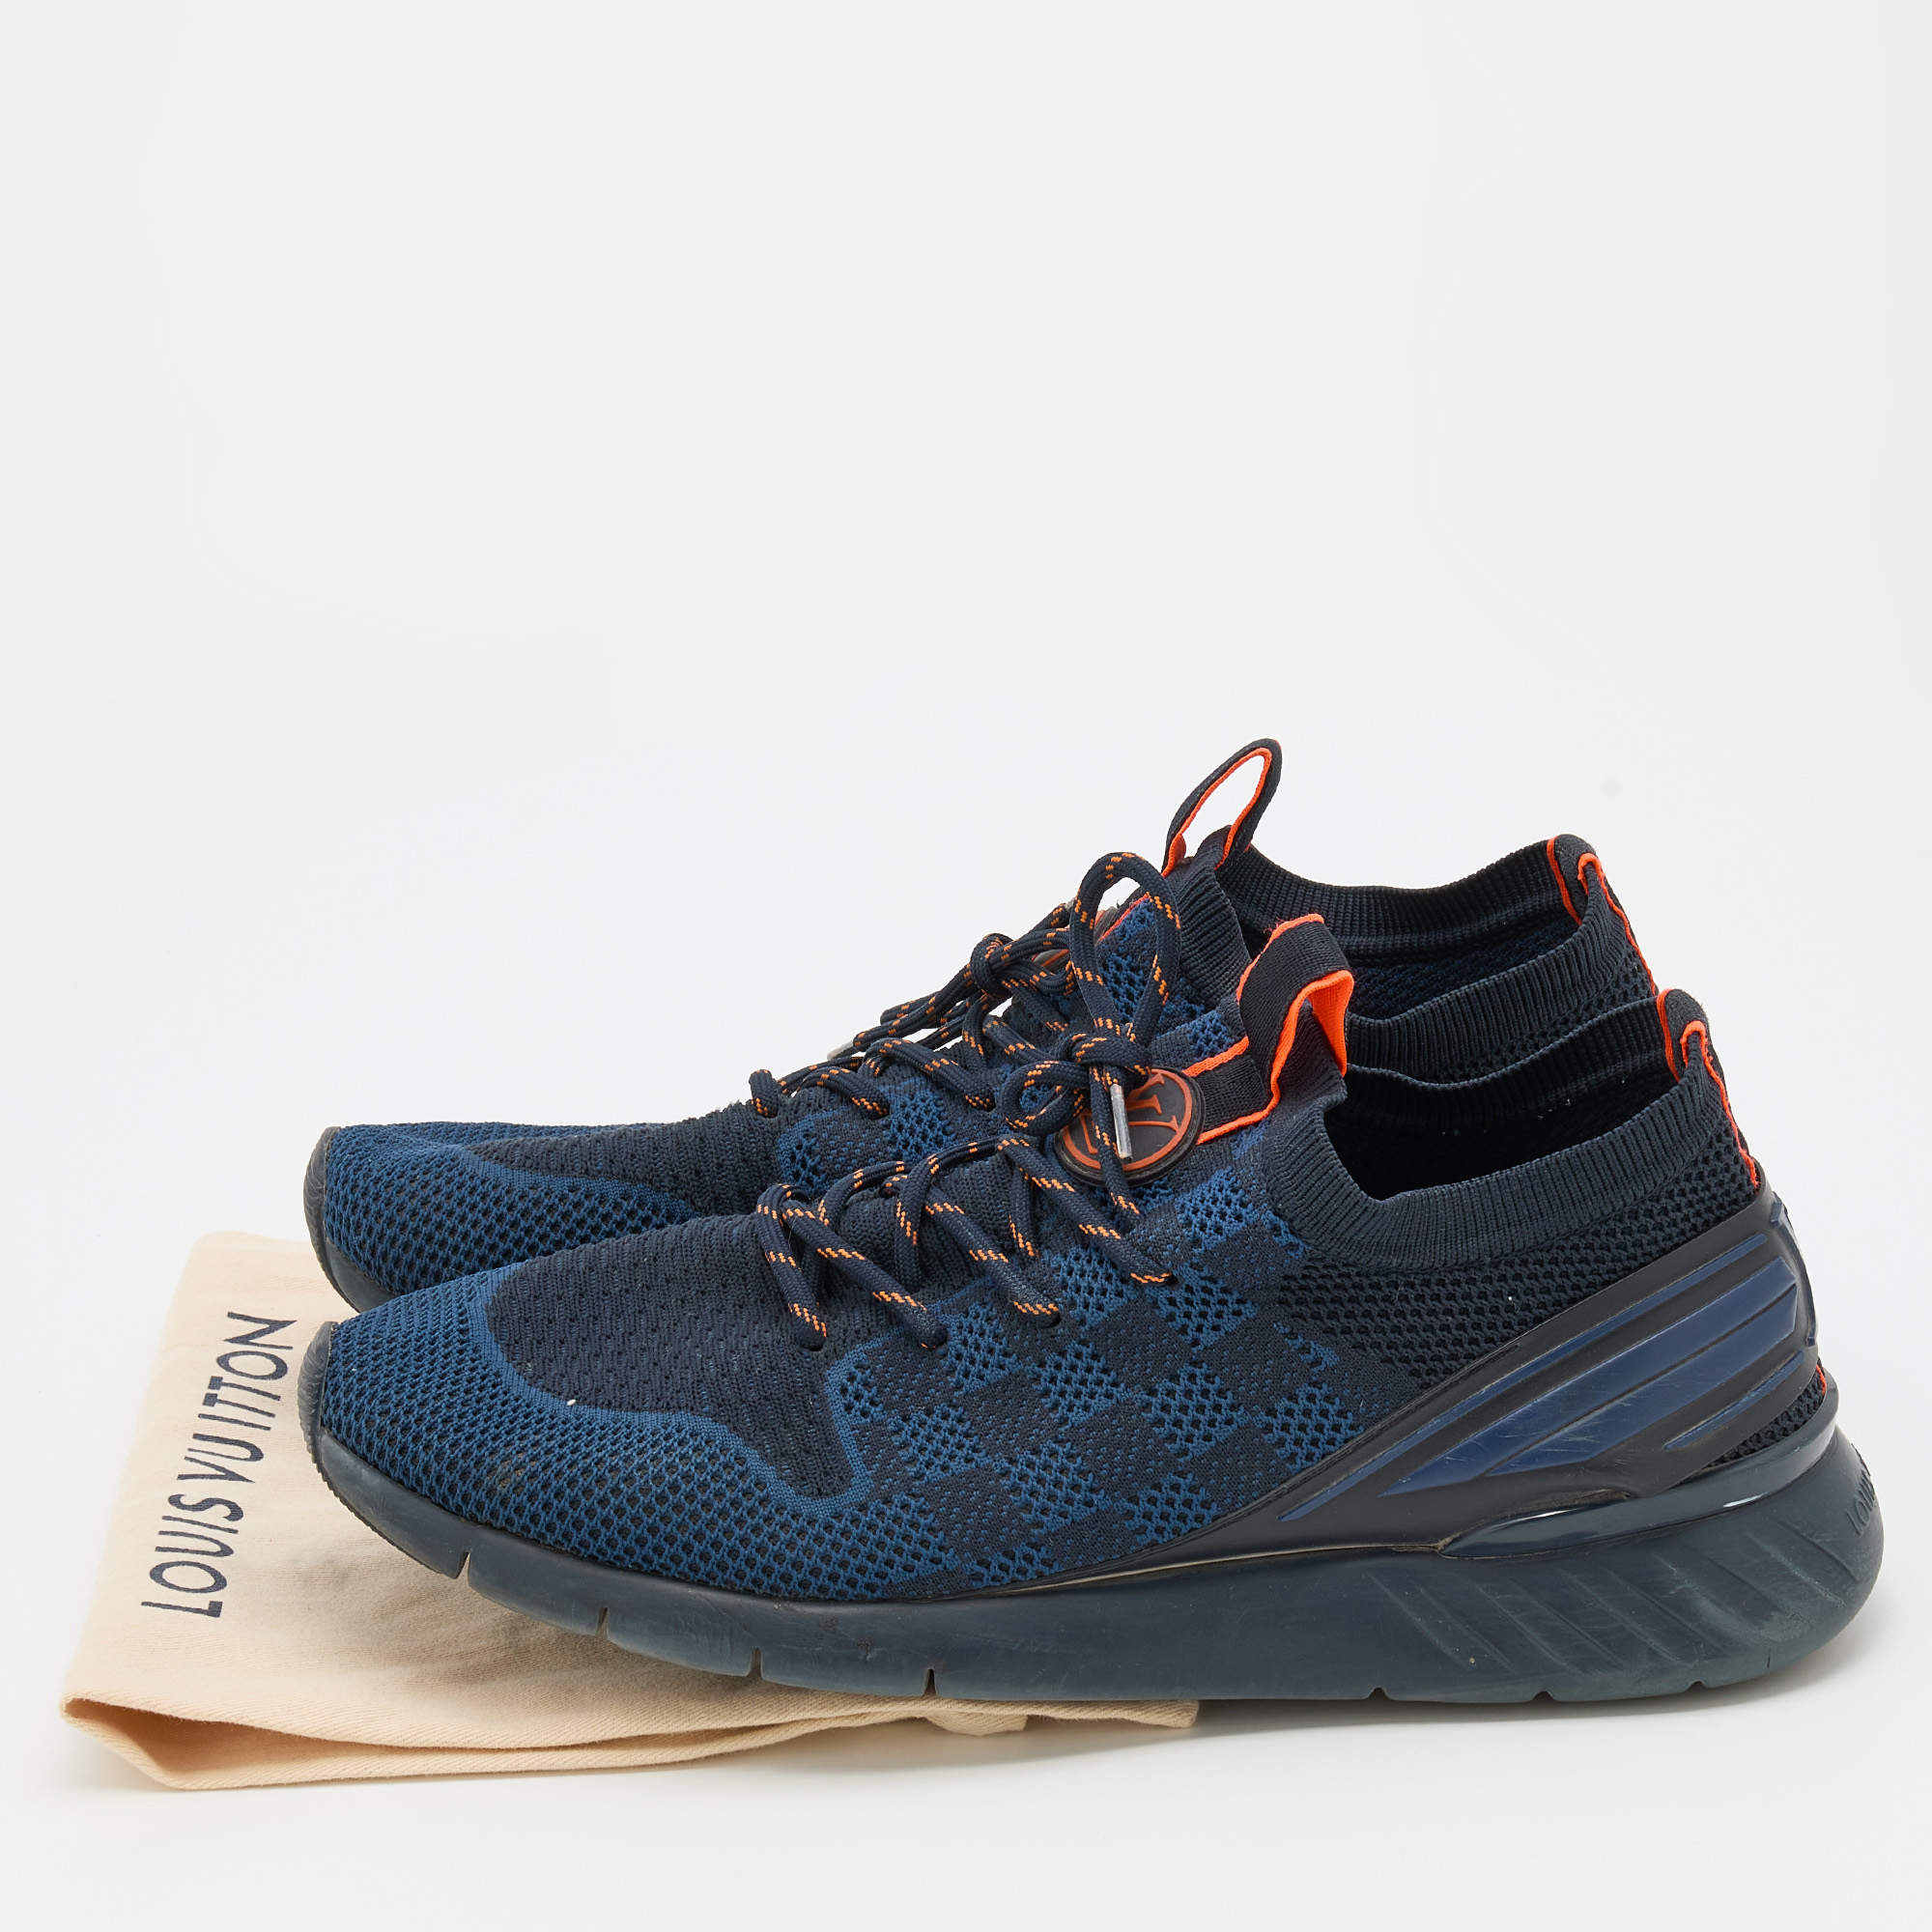 Fastlane cloth low trainers Louis Vuitton Blue size 10.5 UK in